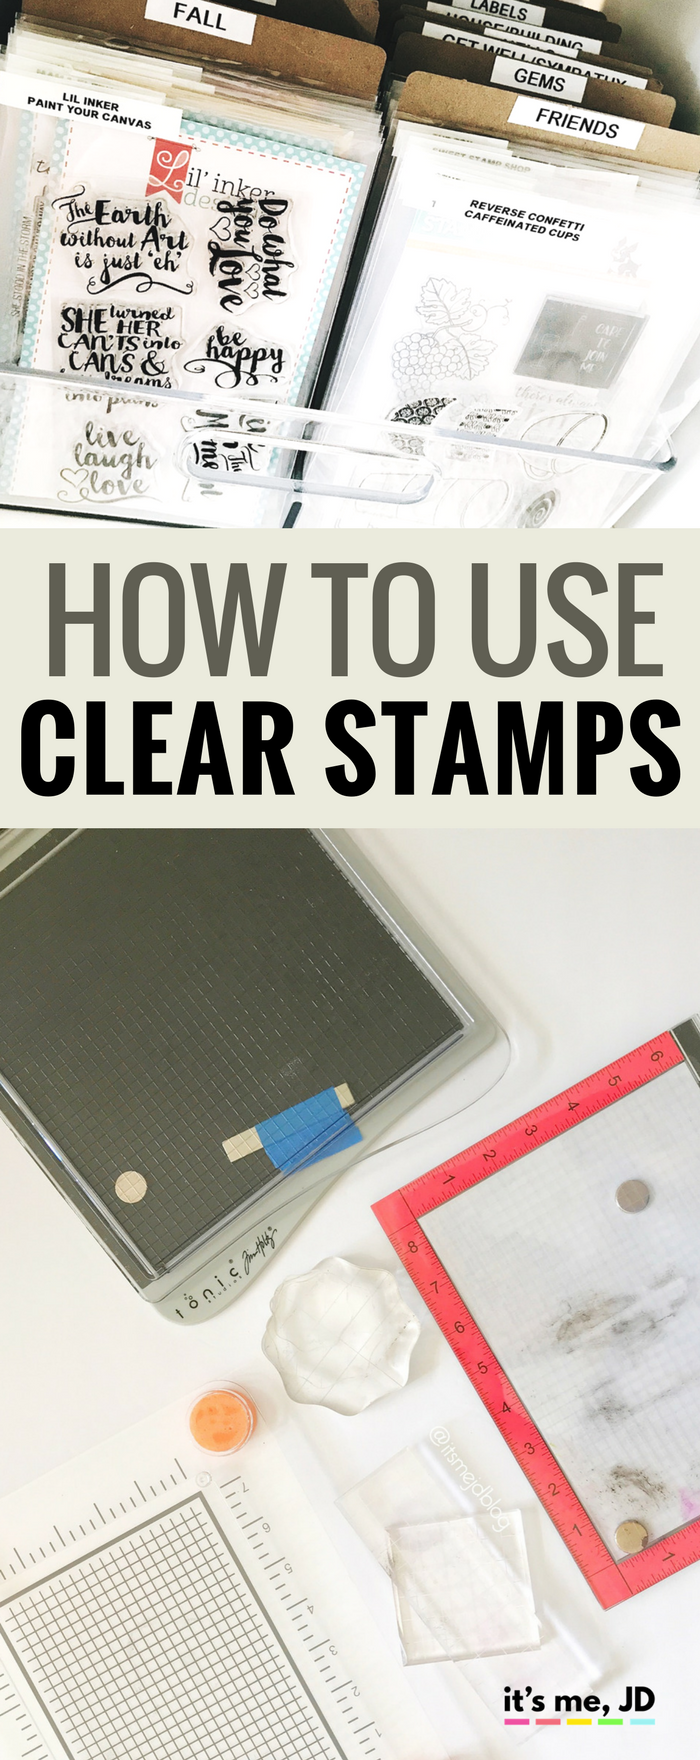 How to Use And Clean Clear Stamps Tutorial, Ideas and Tips for your Next Scrapbook or Card